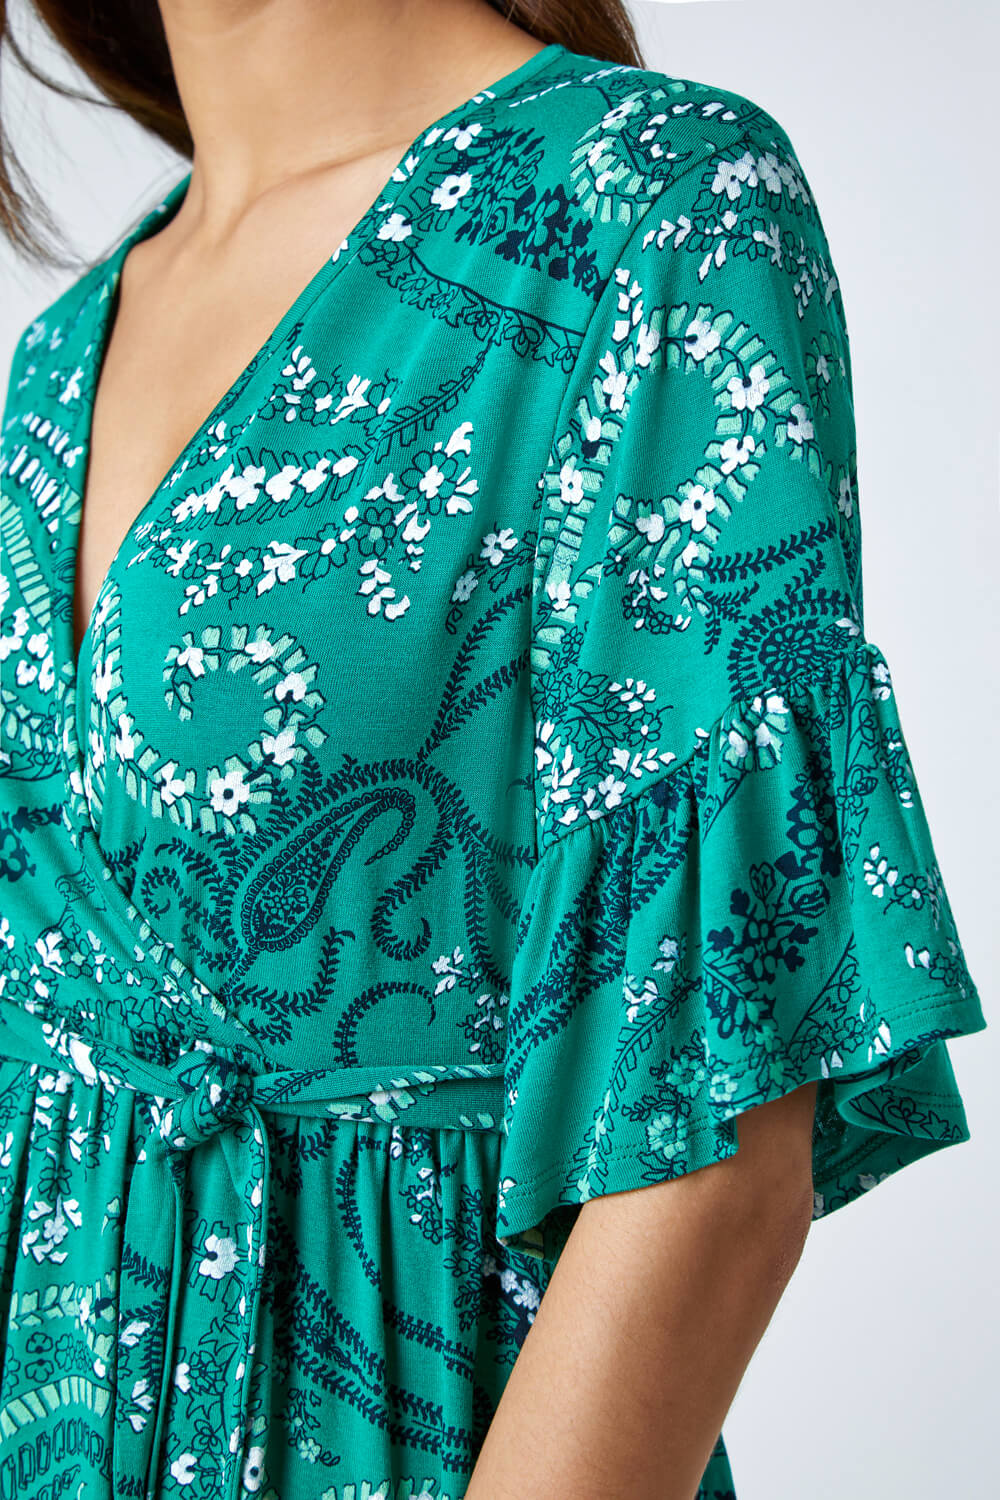 Green Paisley Print Stretch Jersey Wrap Top, Image 5 of 5